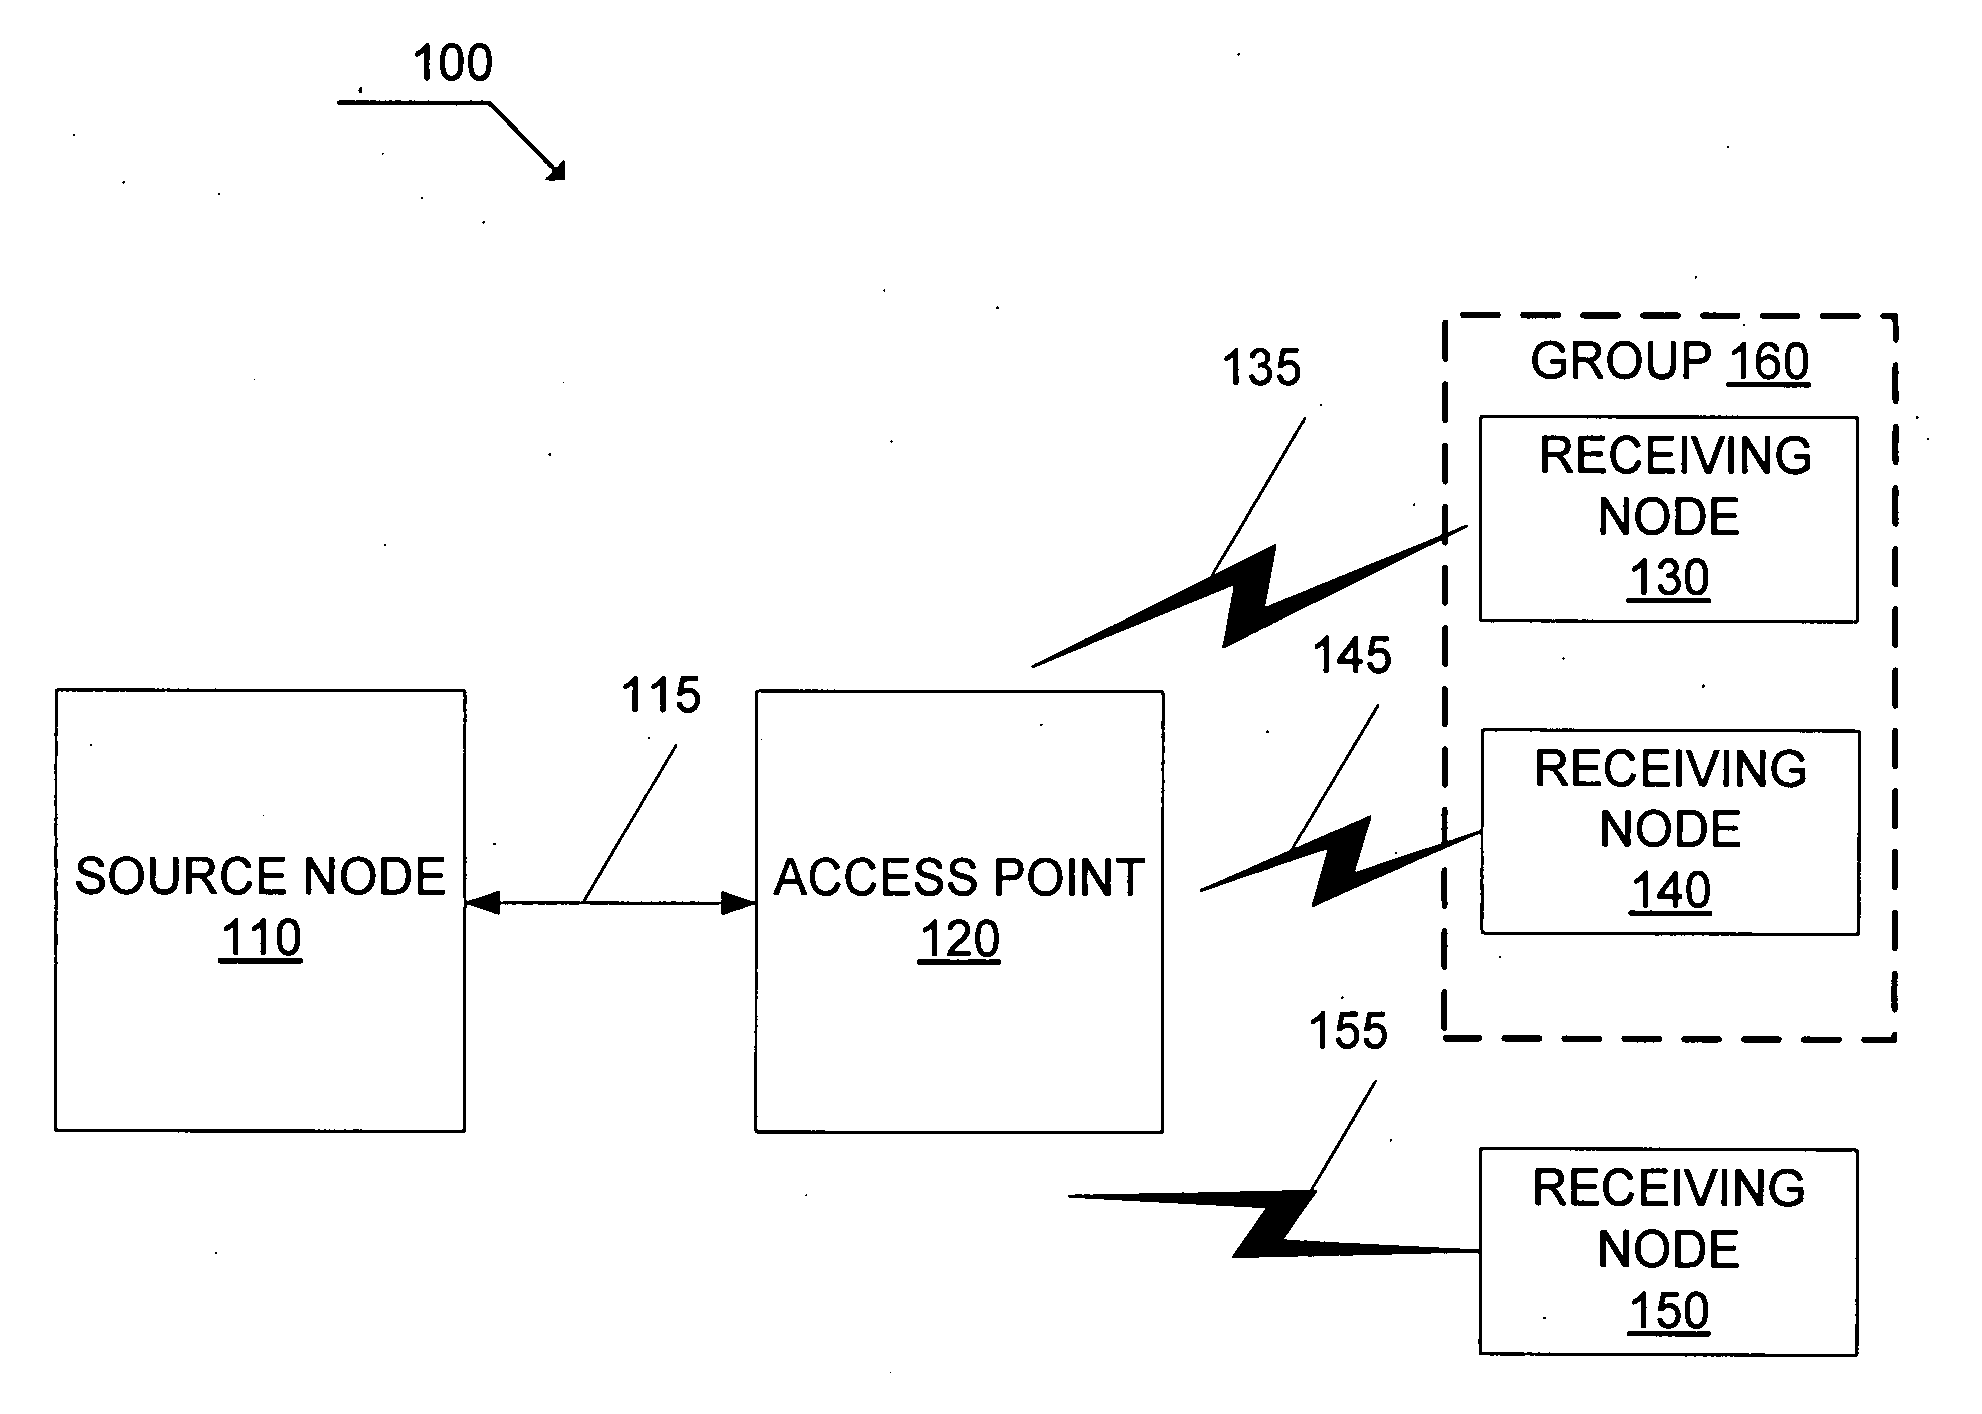 Communications throughput with unicast packet transmission alternative